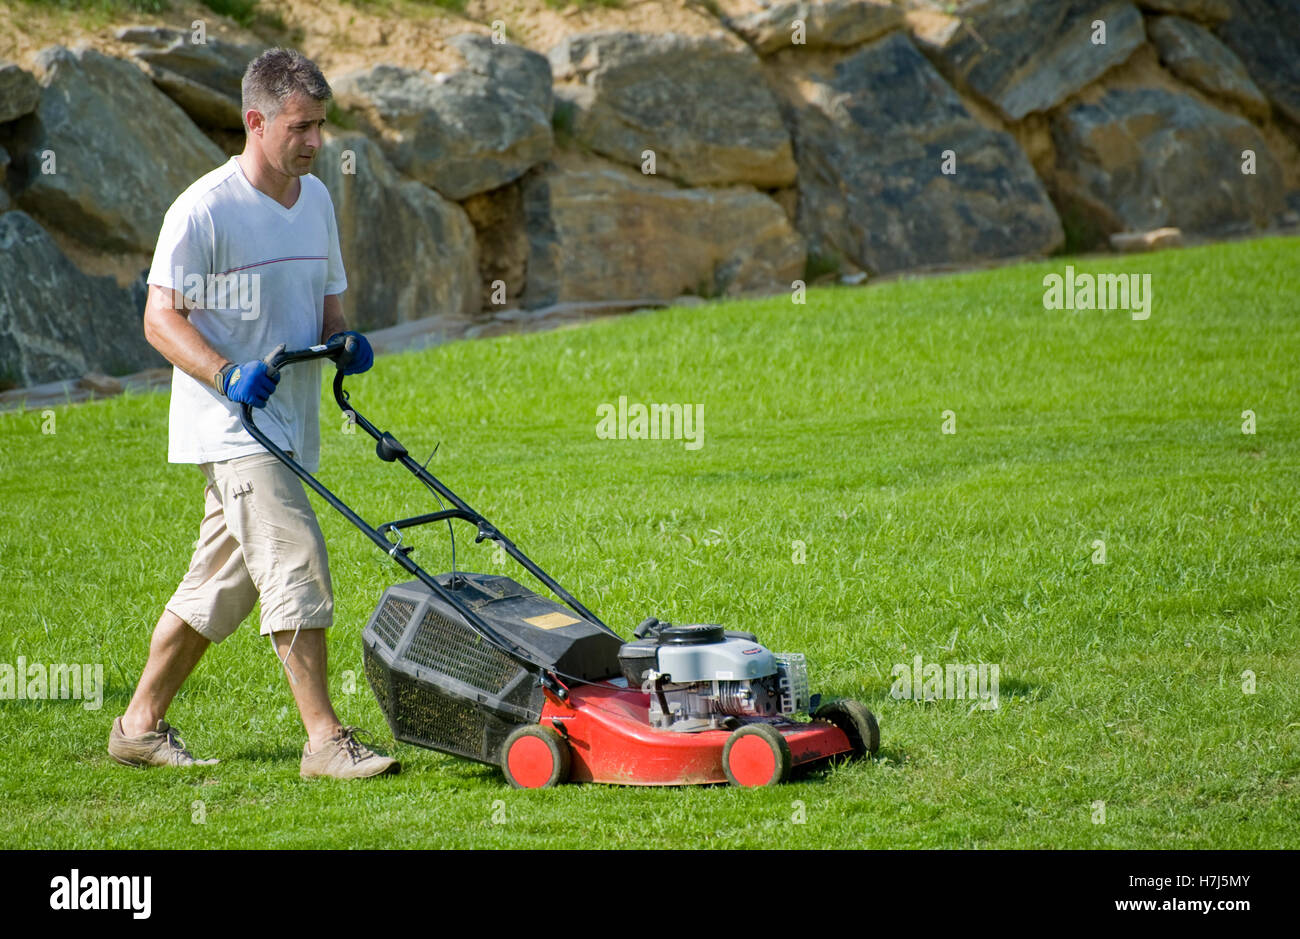 Man mowing the lawn Stock Photo